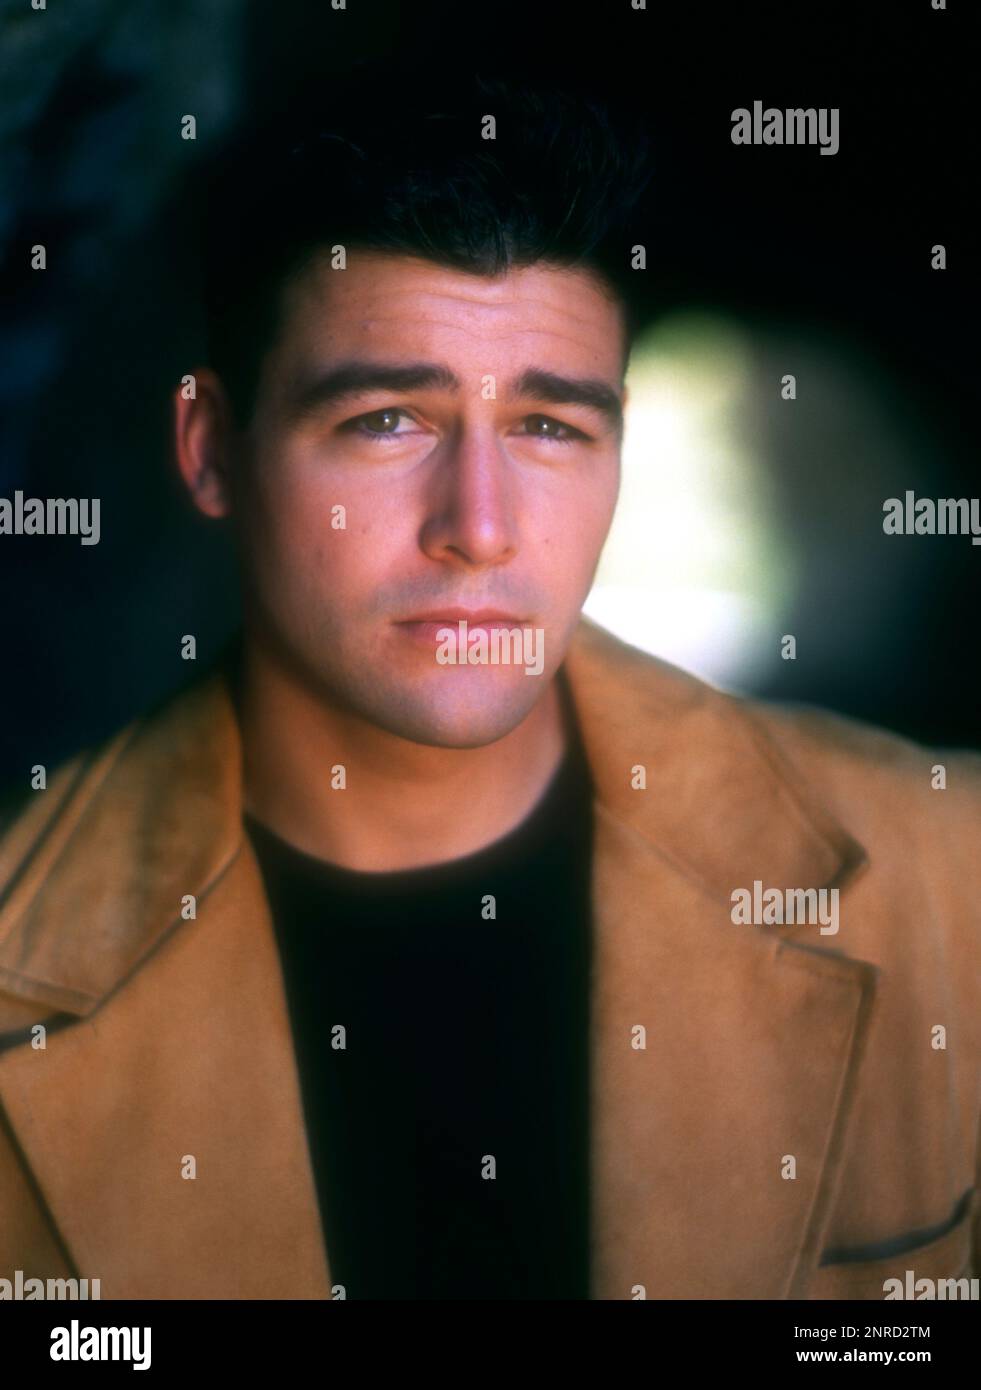 Los Angeles, California, USA 1st July 1996 (EXCLUSIVE) Actor Kyle Candler poses at an exclusive photo shoot on July 1, 1996 in Los Angeles, California, USA. Photo by Barry King/Alamy Stock Photo Stock Photo